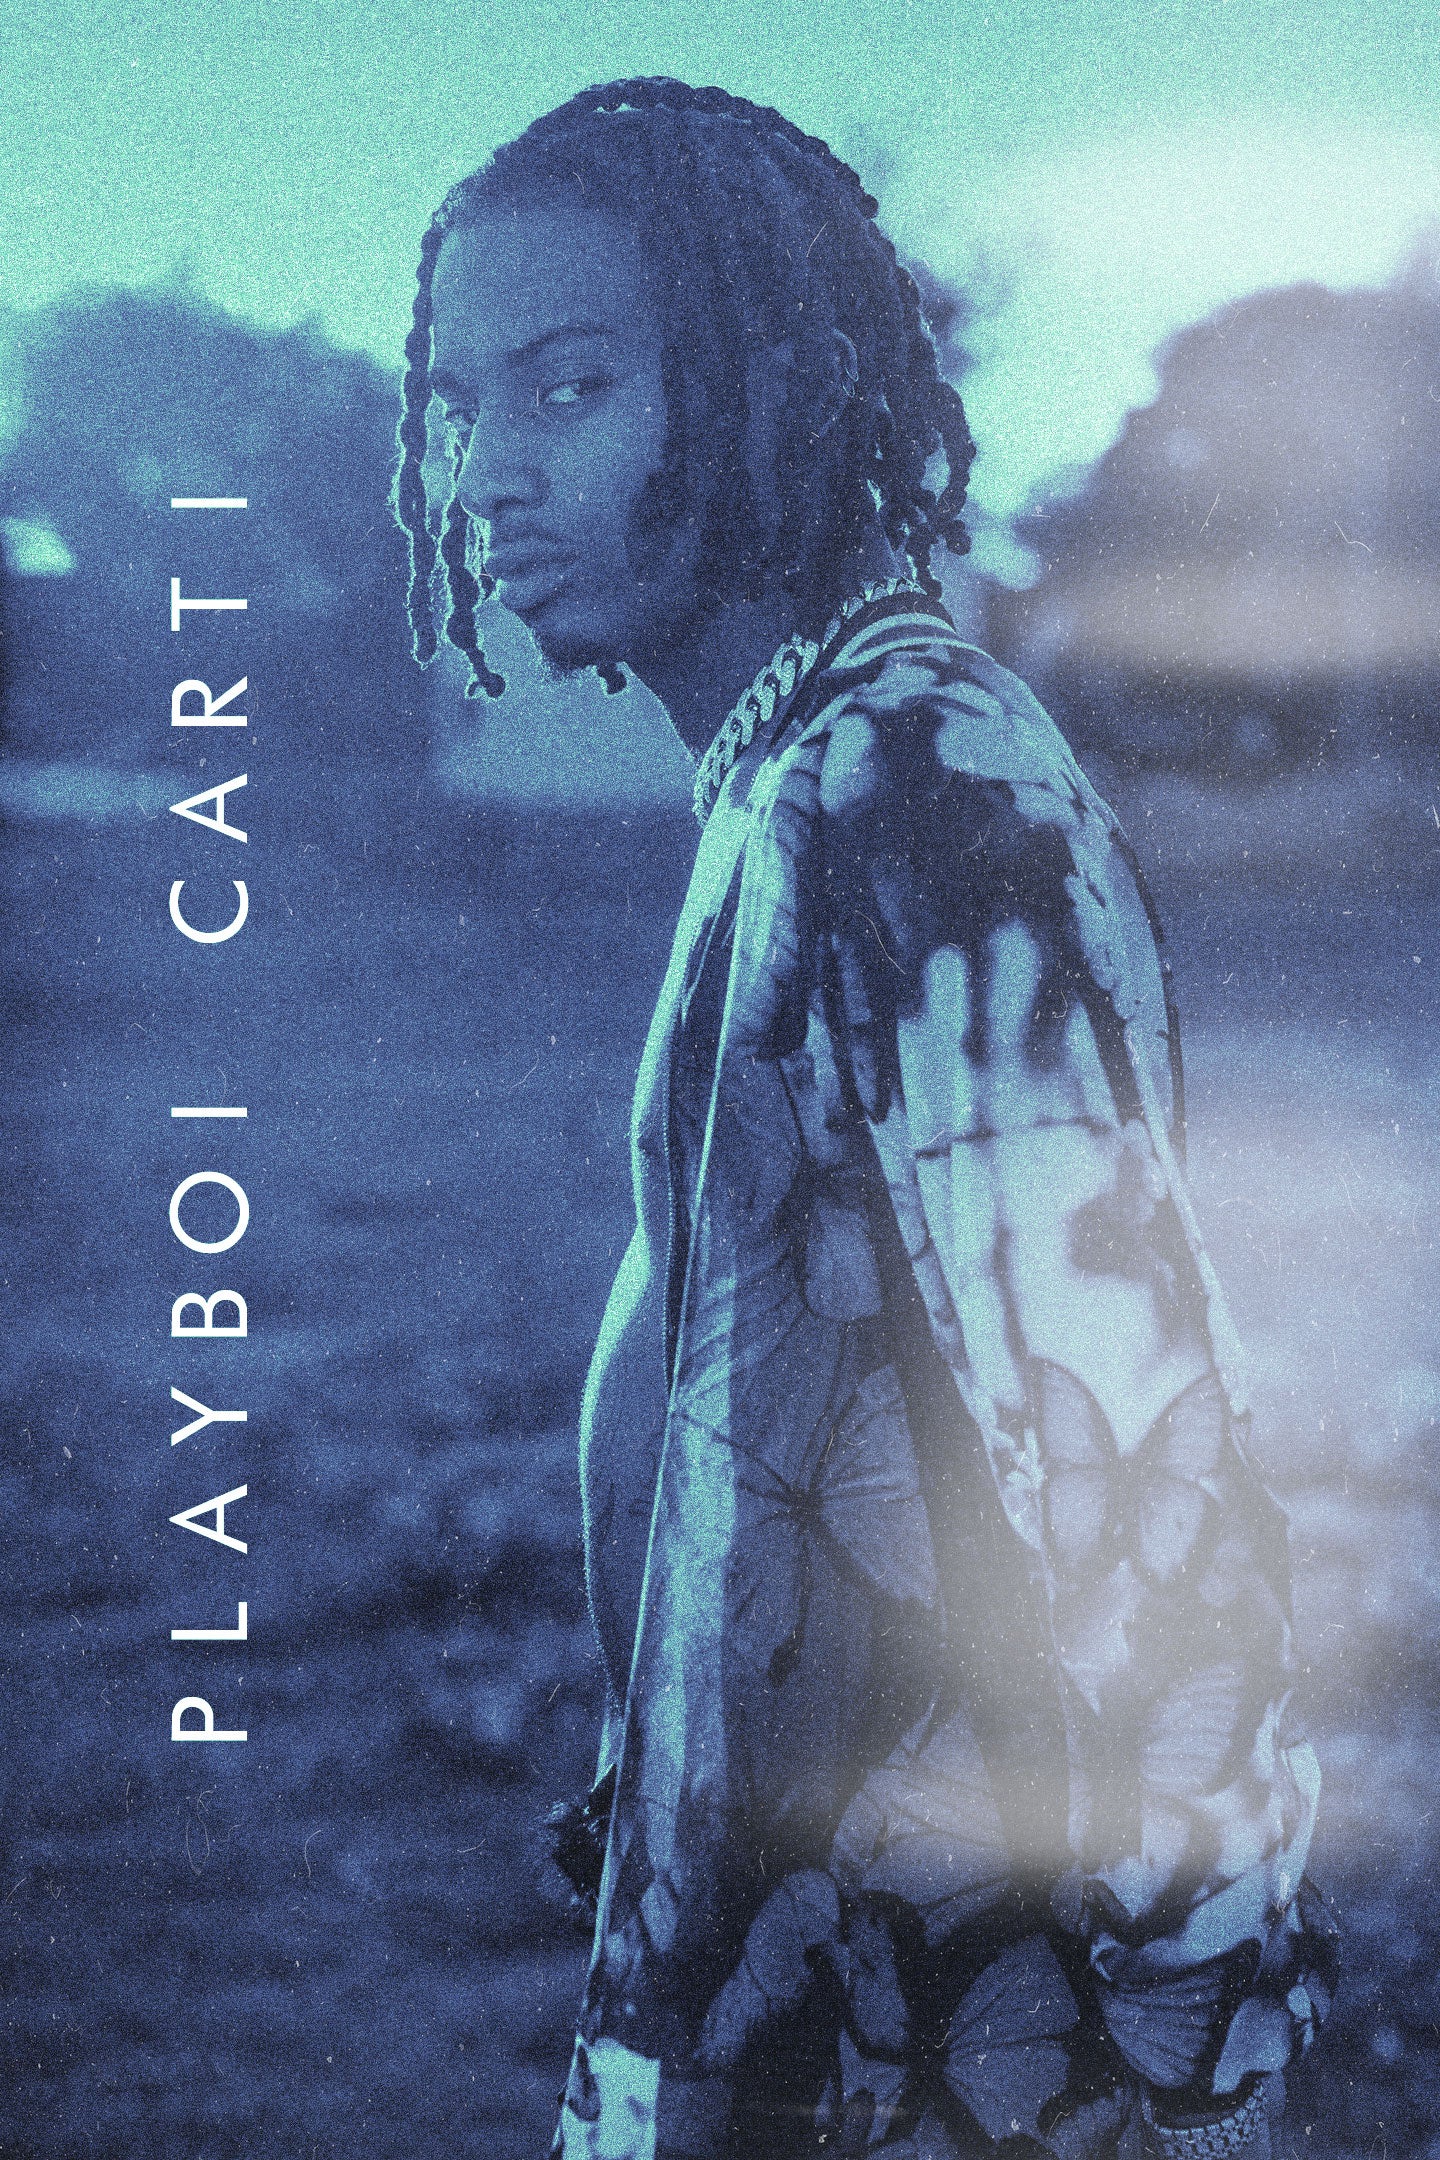 Playboi Carti 'Blue In The Face' Poster